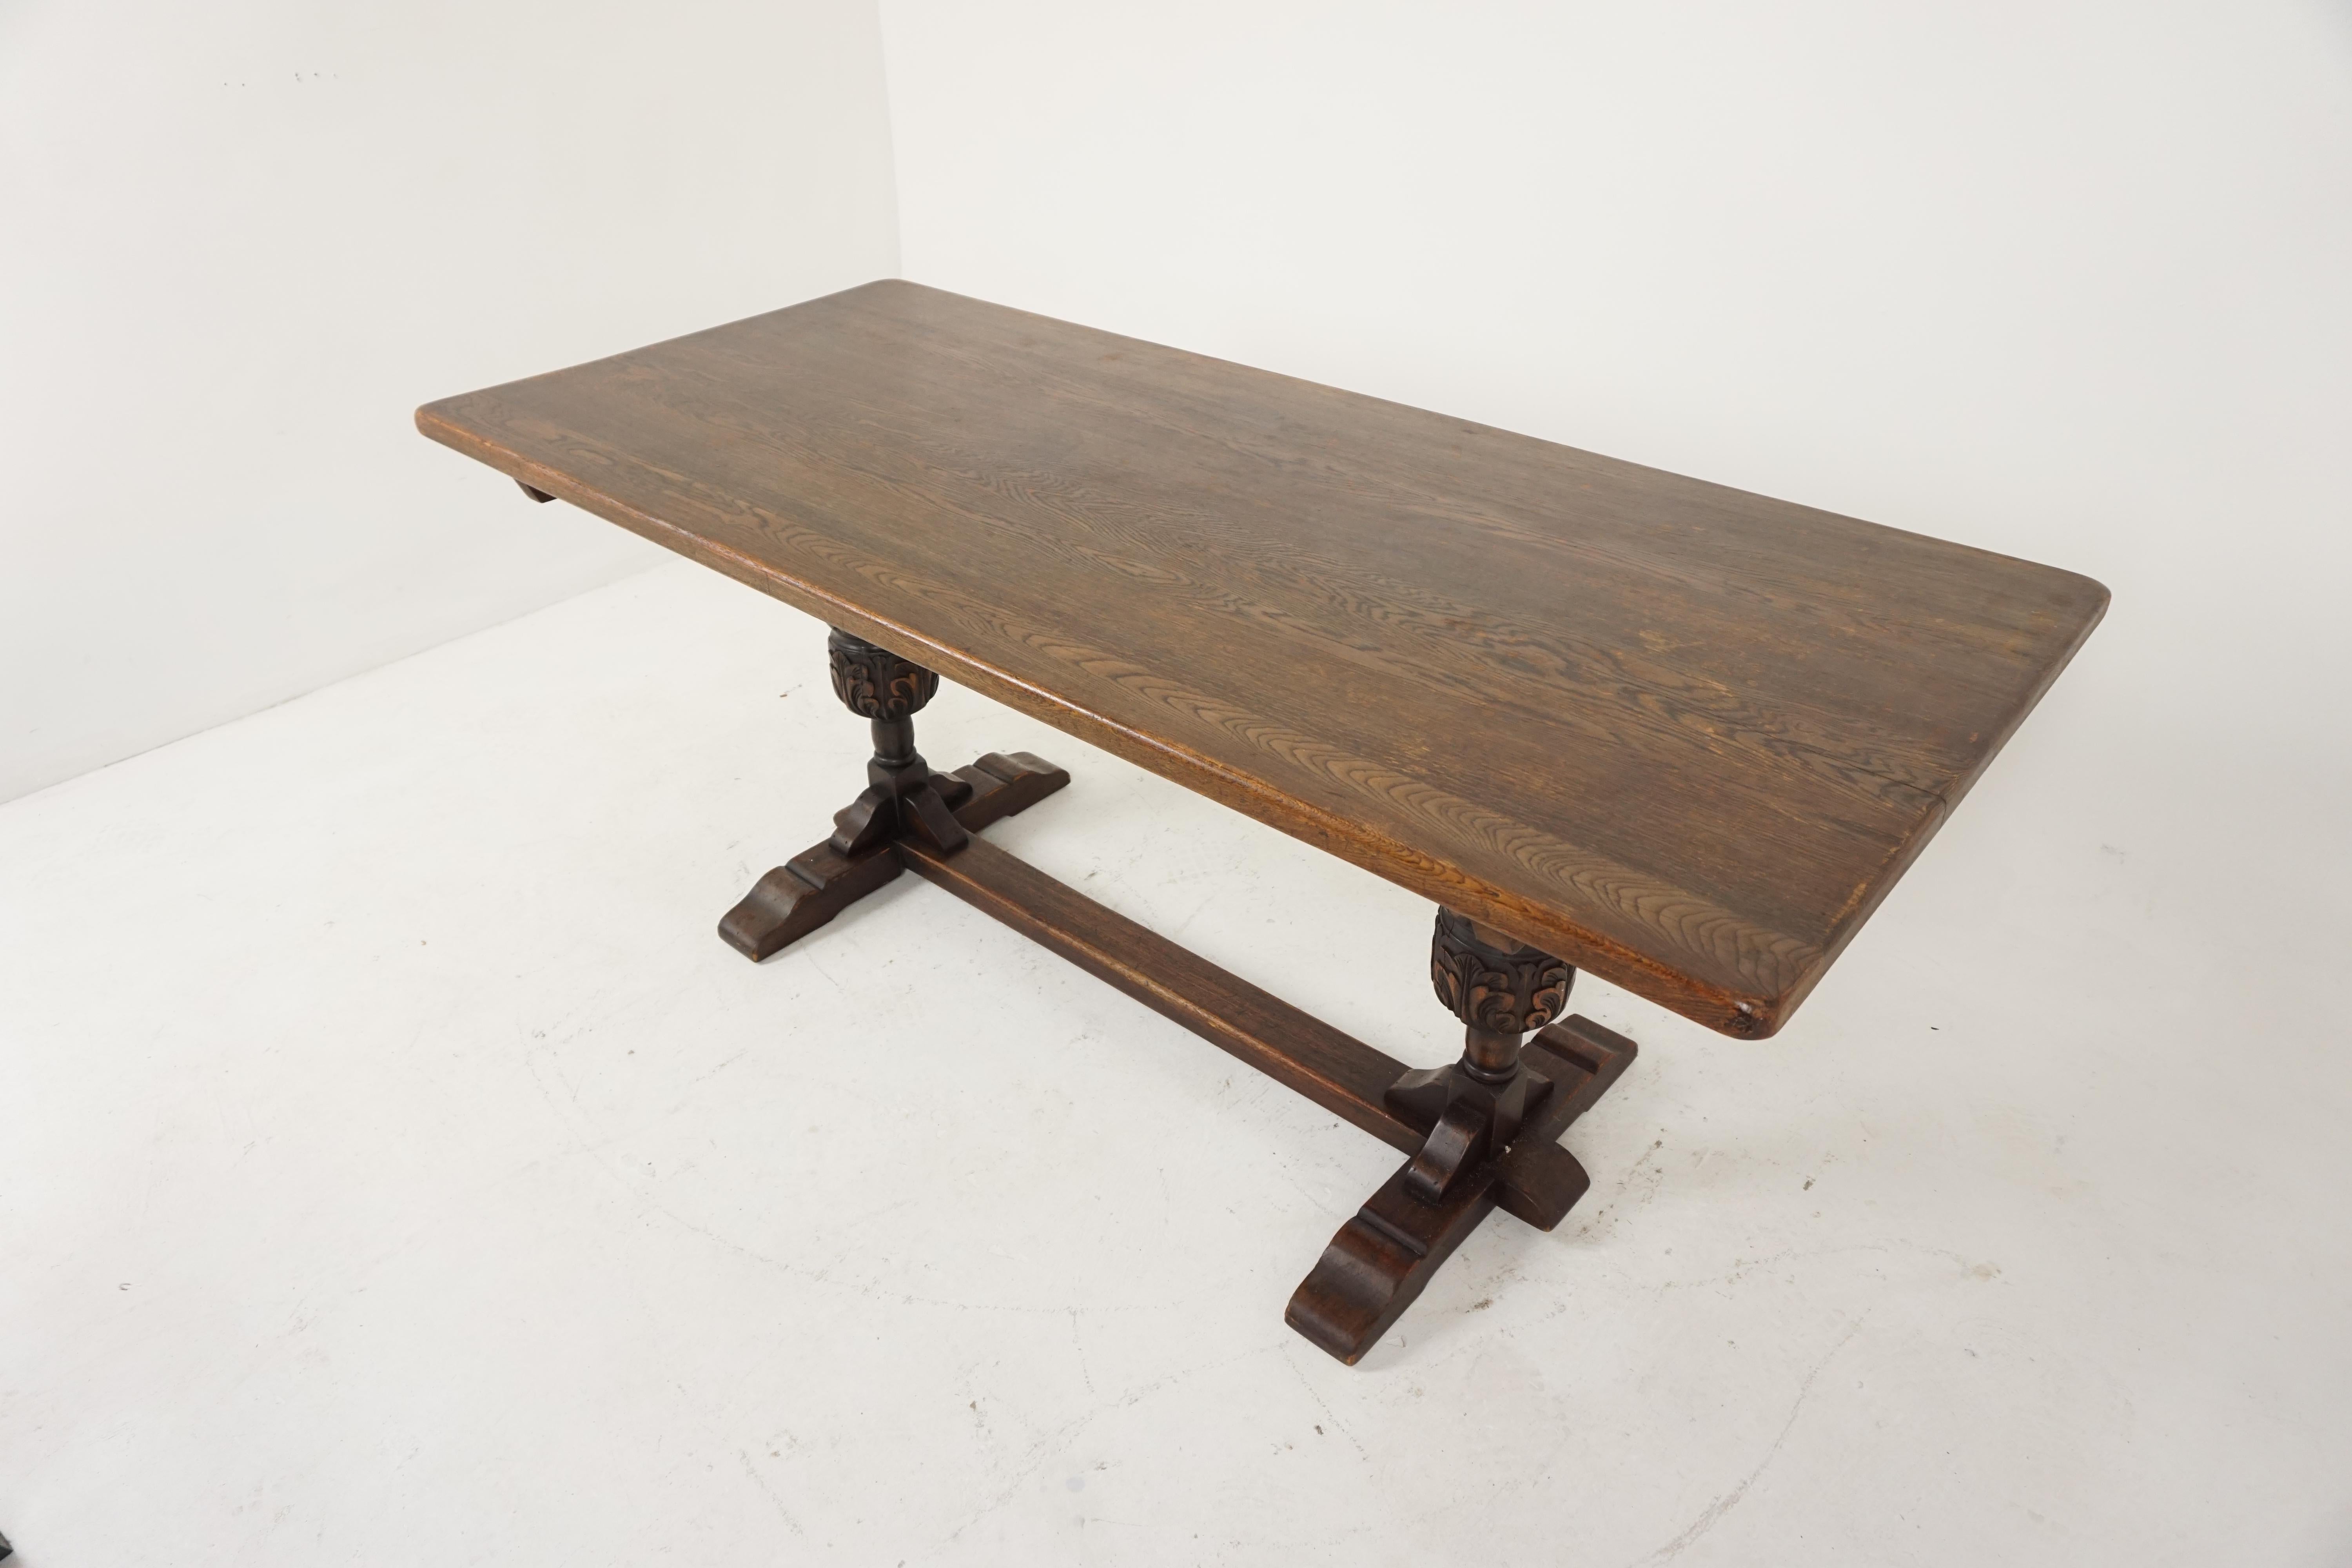 Hand-Crafted Antique Oak Table, Refectory Farmhouse Dining Table, Scotland 1930, B1813